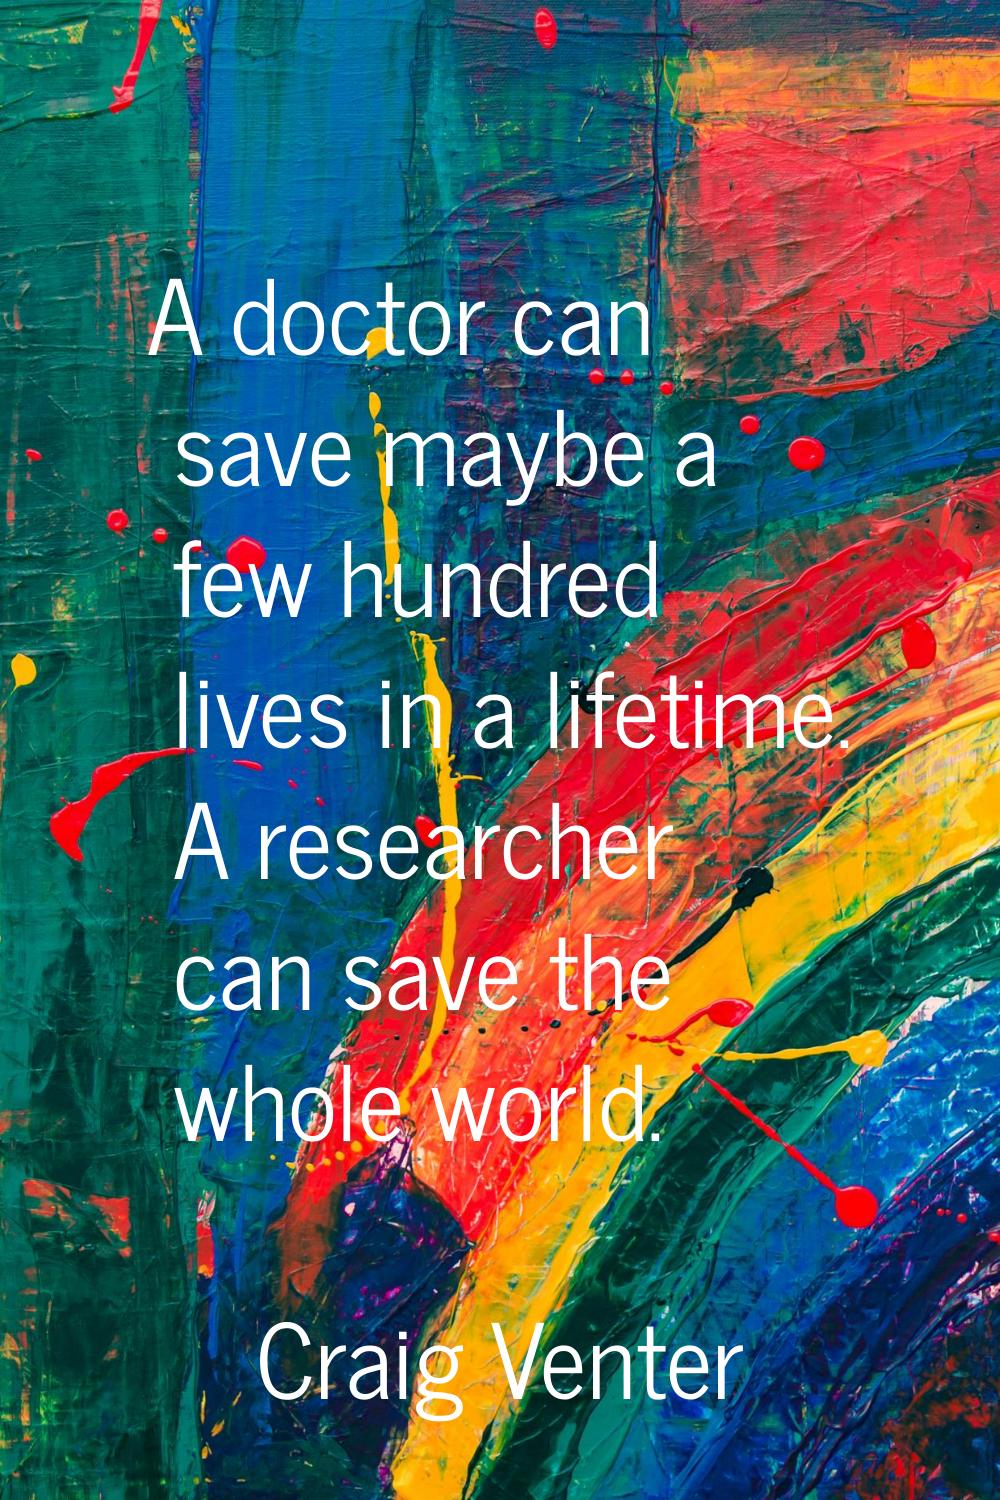 A doctor can save maybe a few hundred lives in a lifetime. A researcher can save the whole world.